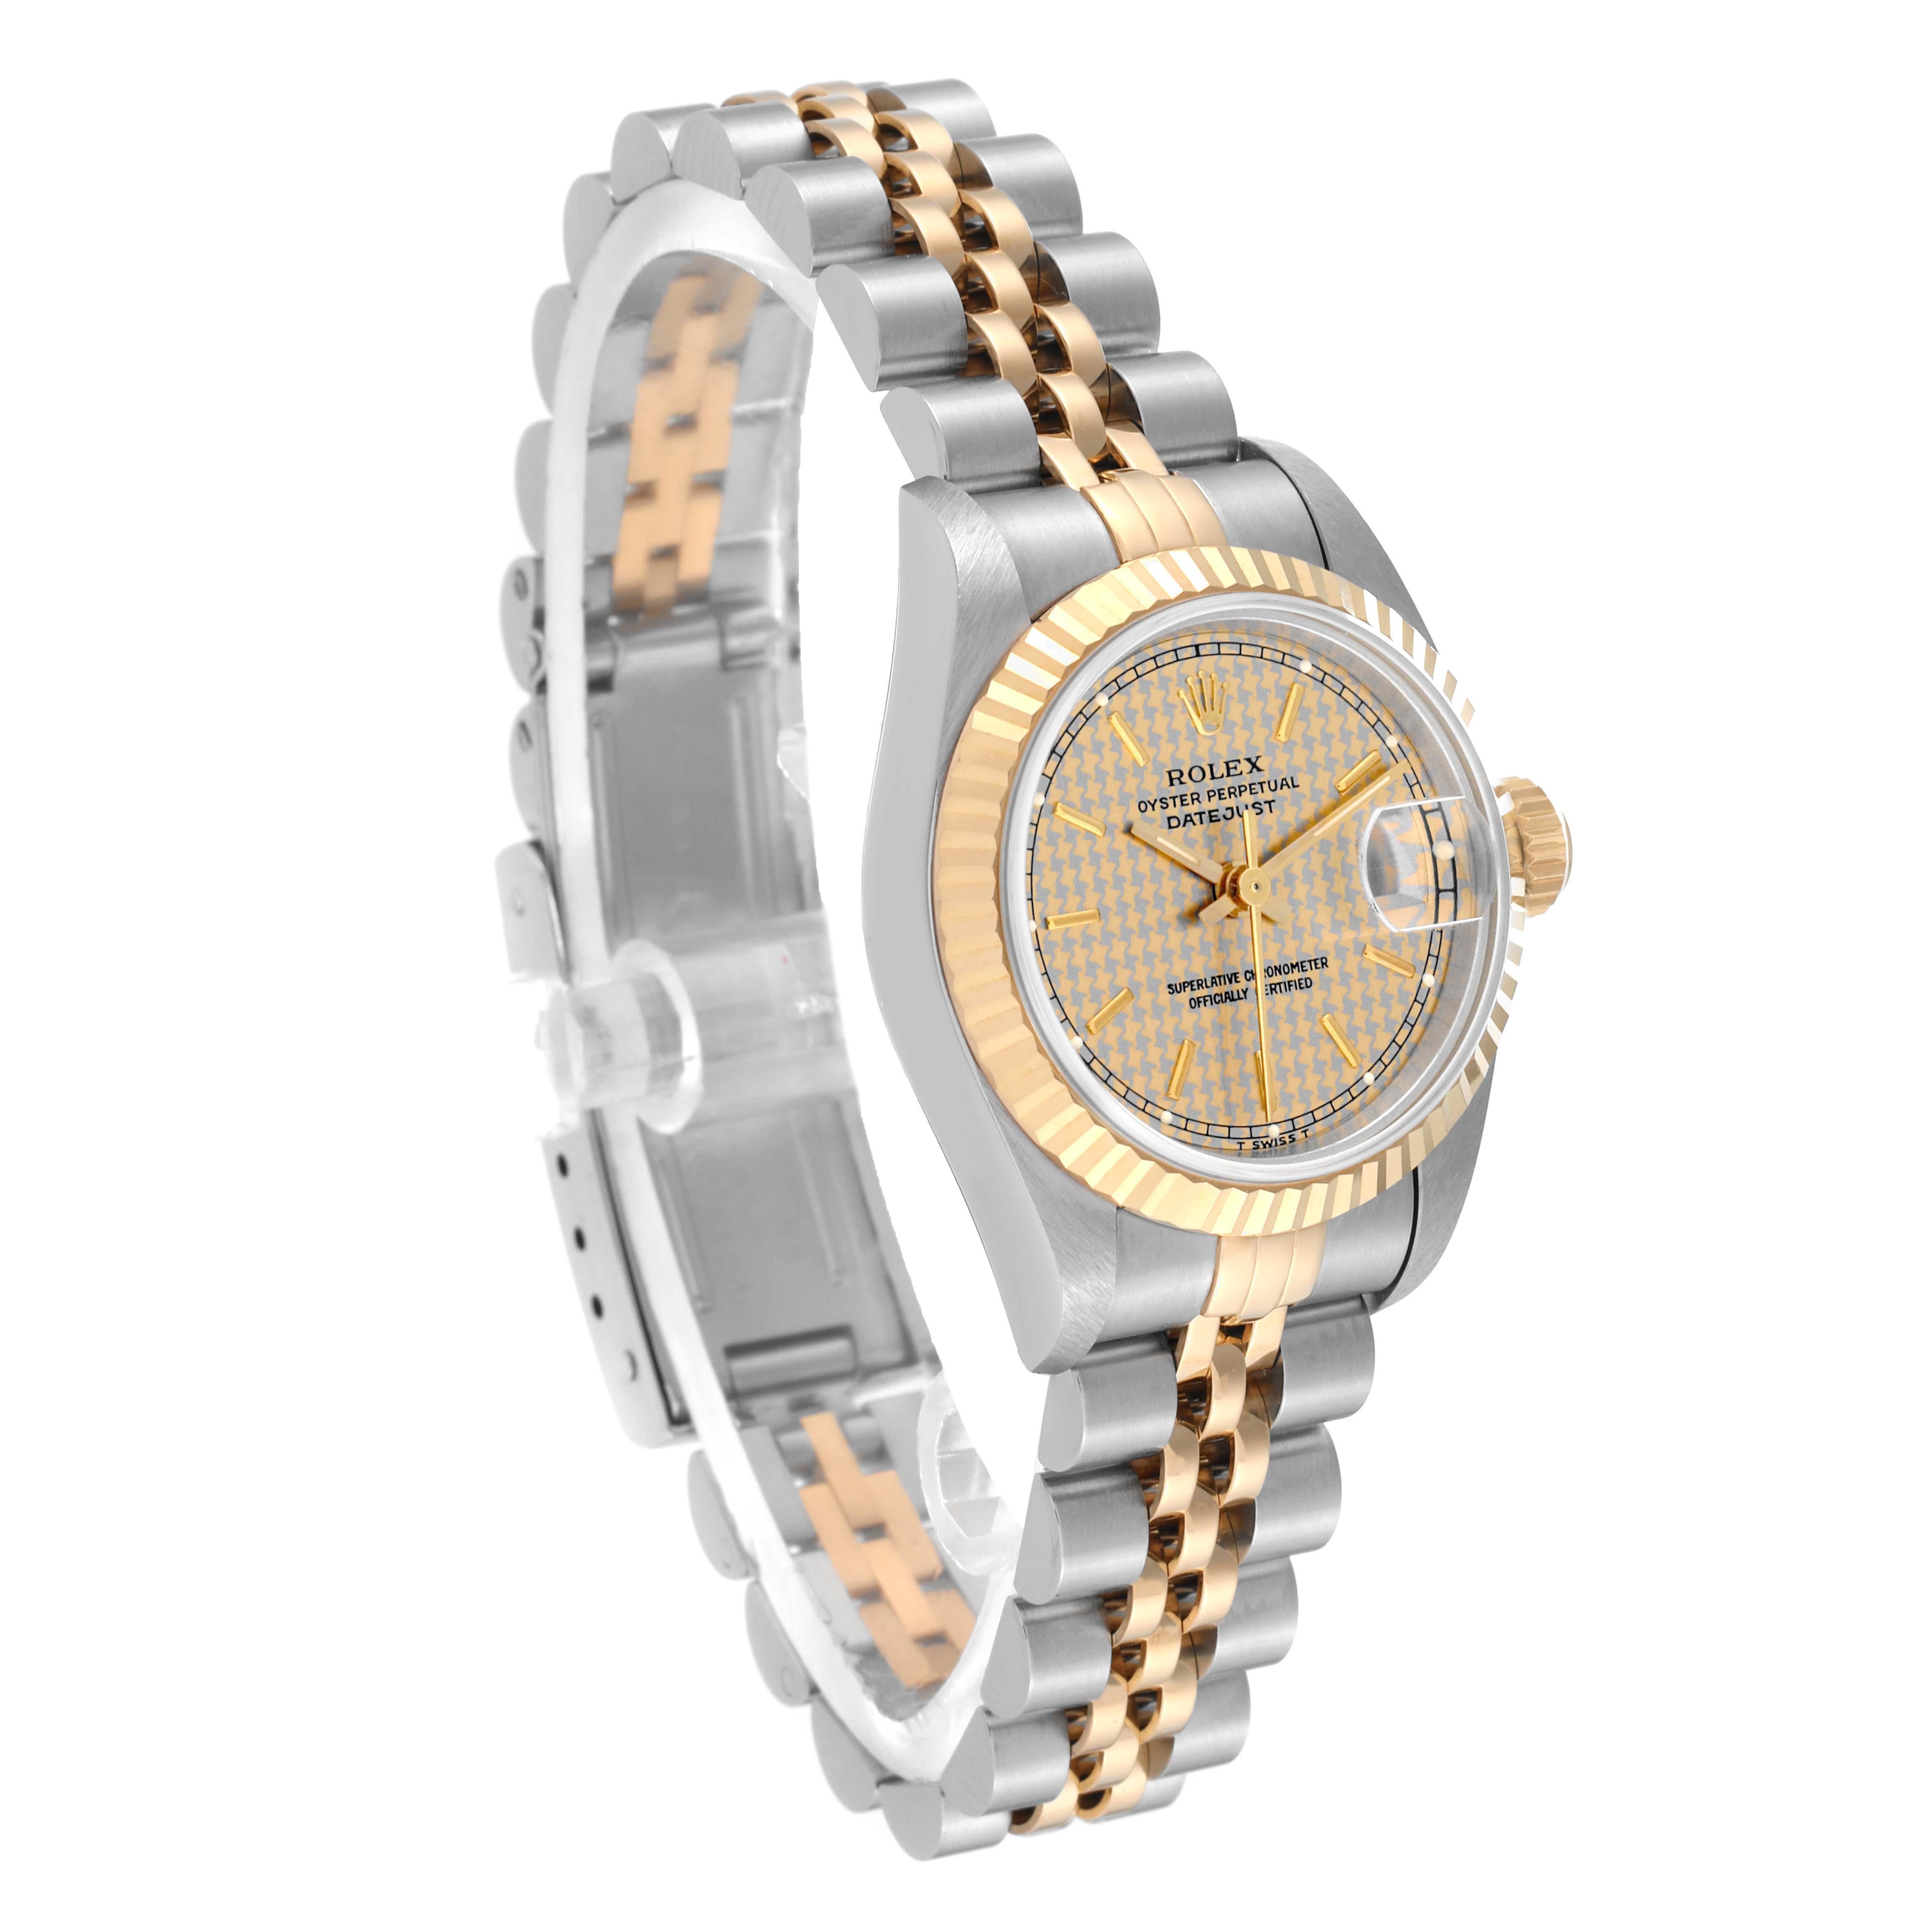 Rolex Datejust Steel Yellow Gold Houndstooth Dial Ladies Watch 69173 For Sale 6